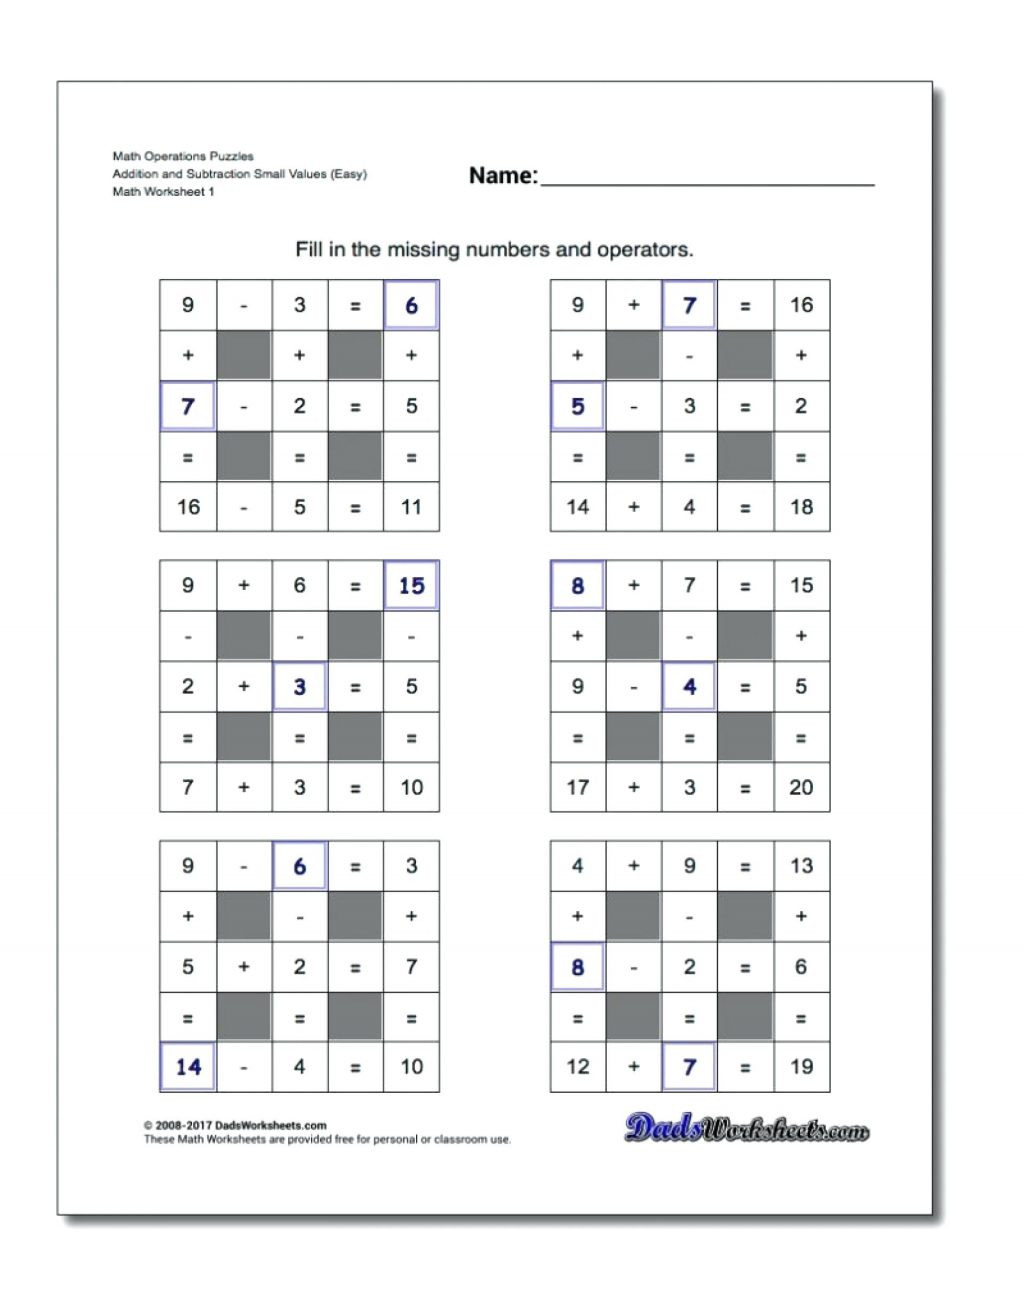 Math Puzzles Brain Teasers Worksheets